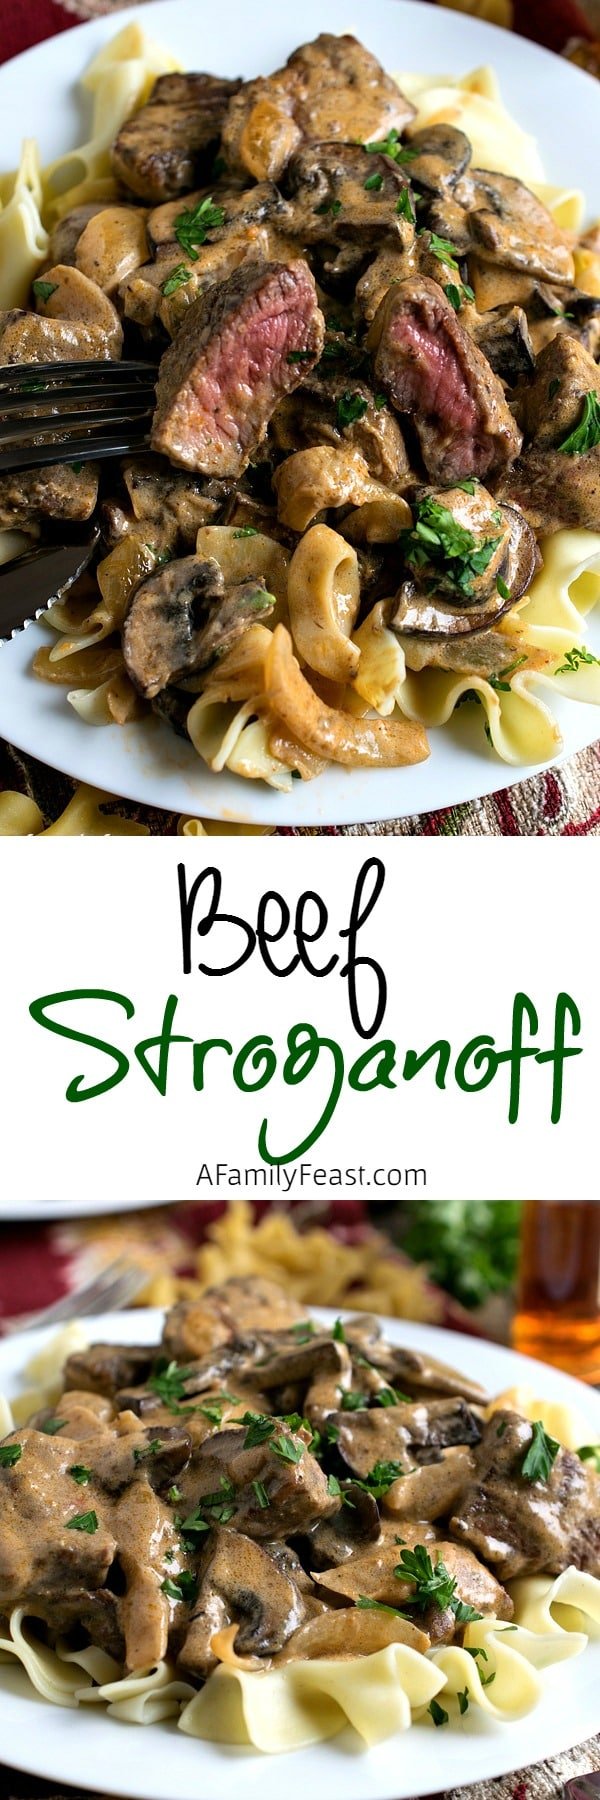 Beef Stroganoff prepared the way it should be! Tender chunks of beef and sliced mushrooms in a fantastic, flavorful sauce.